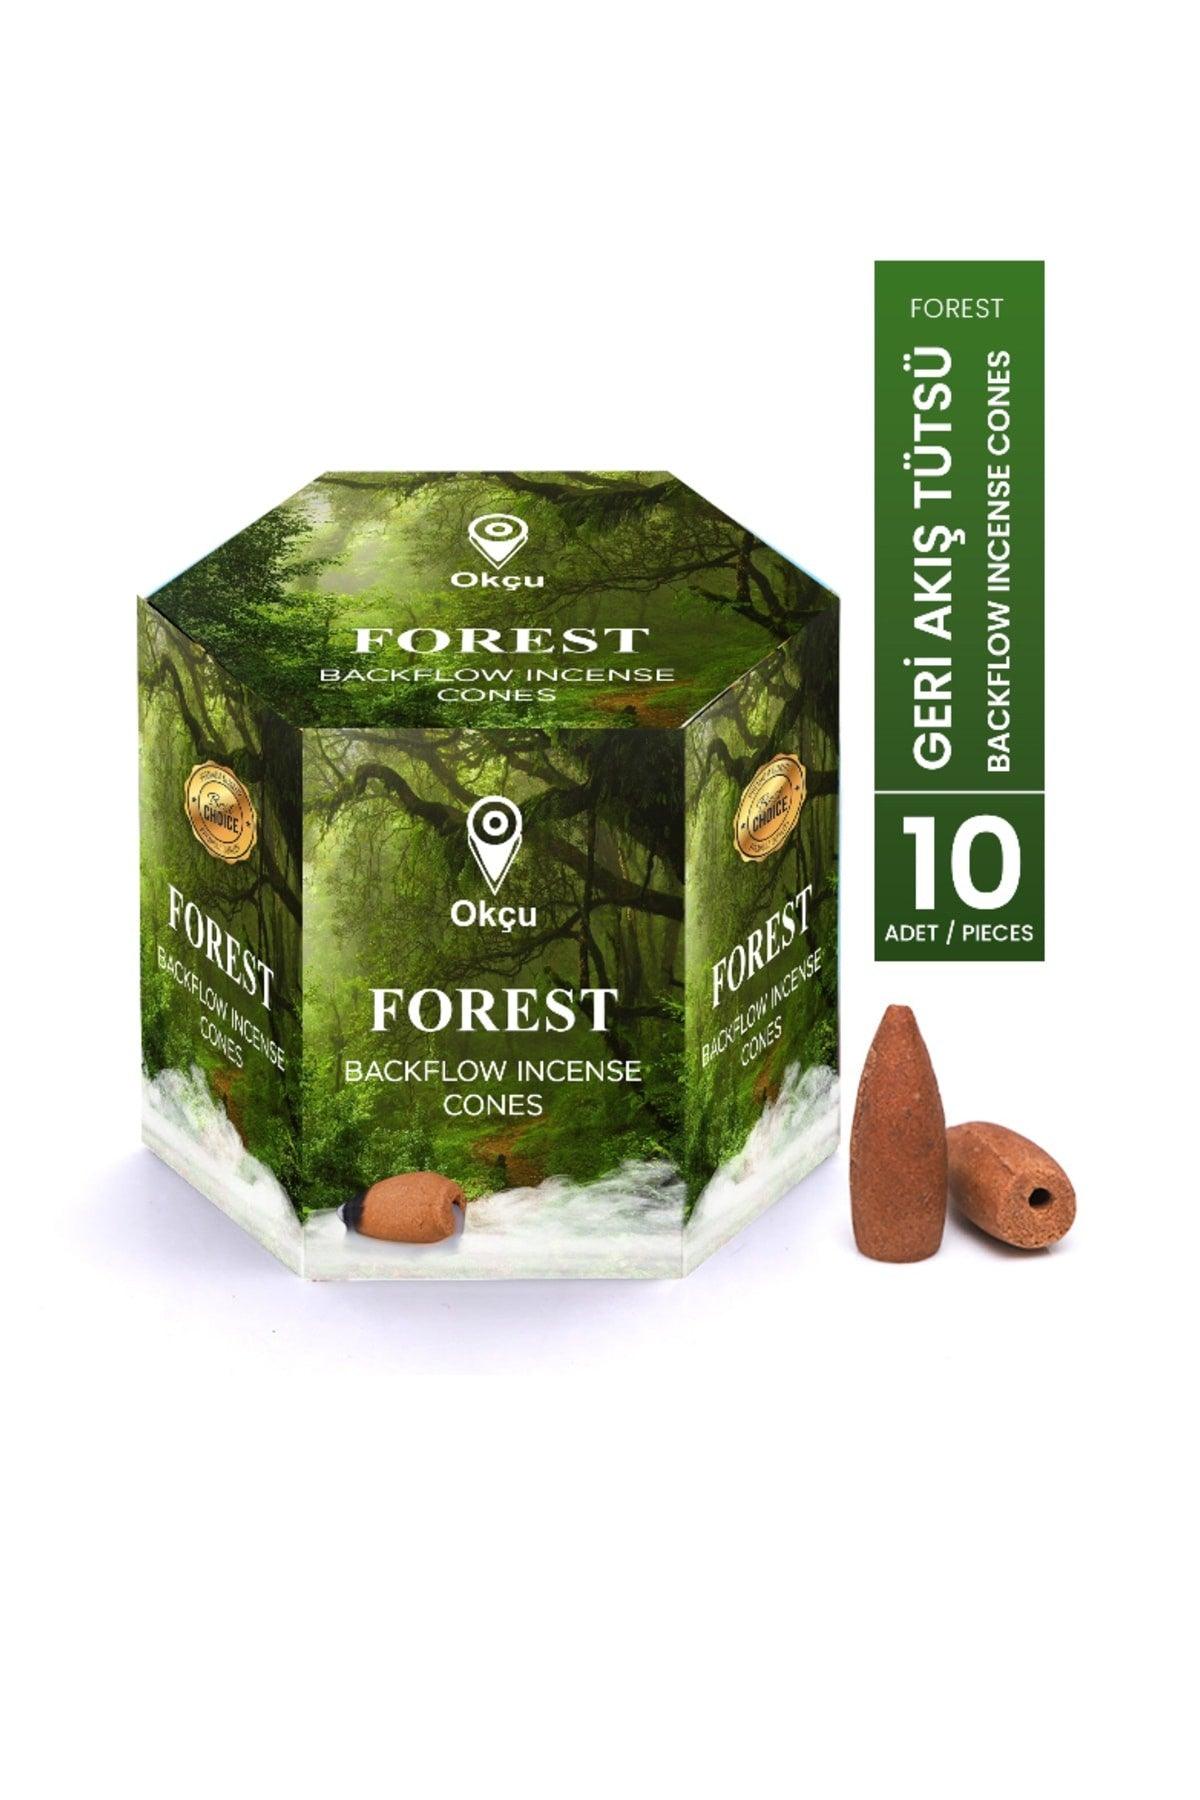 Forest Backflow Waterfall Incense Conical Backflow Incense Cones 10 Pcs/Pieces - Swordslife